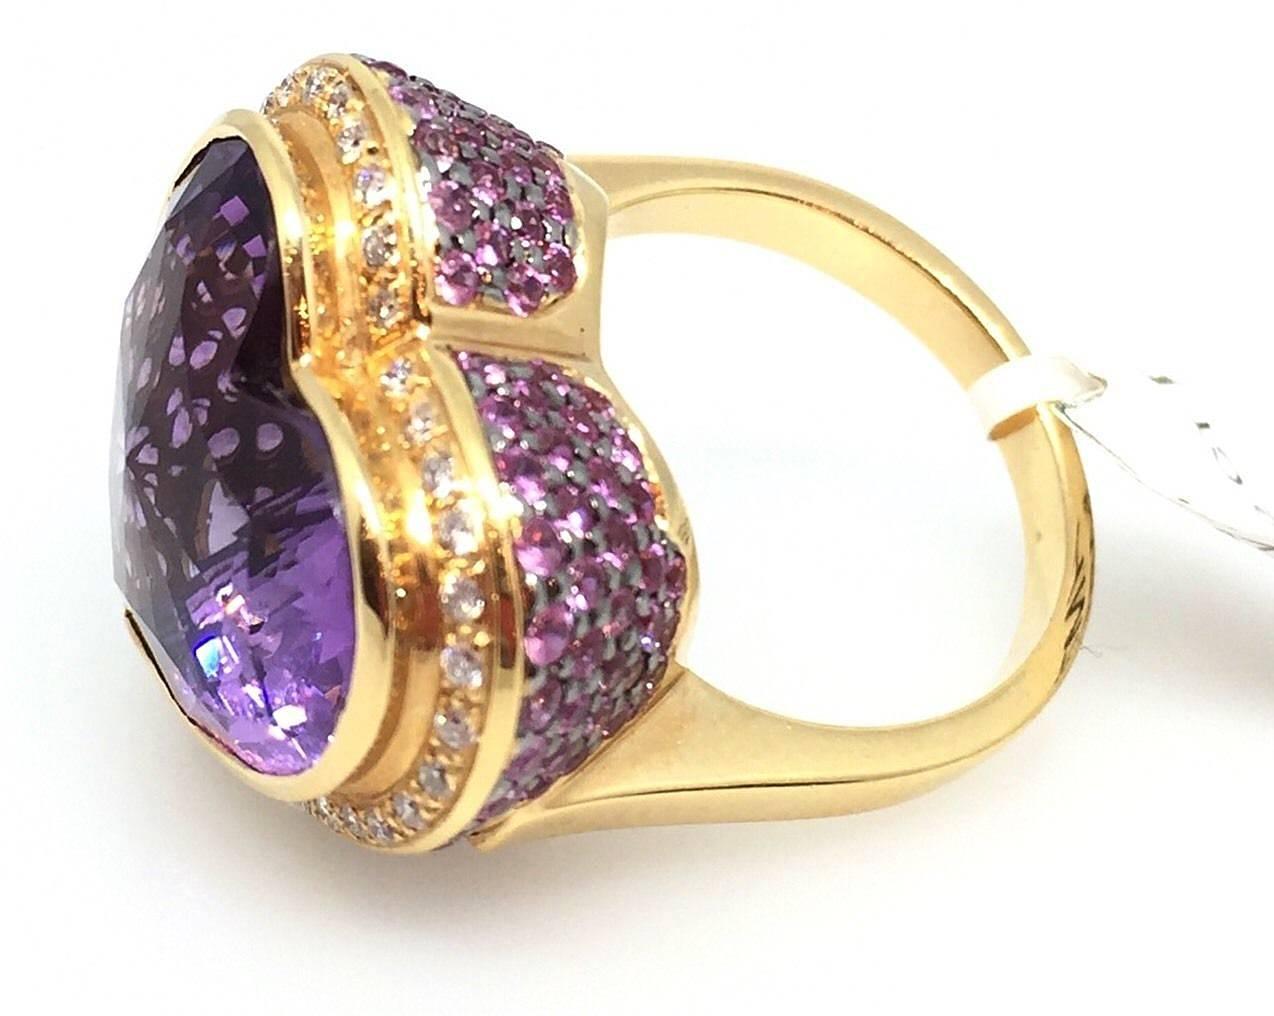 Heart shaped Amethyst and Multi-gem Ring by Zorab featuring a  Fancy Heart Shaped 
Brilliant Amethyst measuring 17mm x 16mm and weighing 13.56 carats, Bezel set in the center. High setting surrounded by Round Brilliant diamonds totaling 0.36